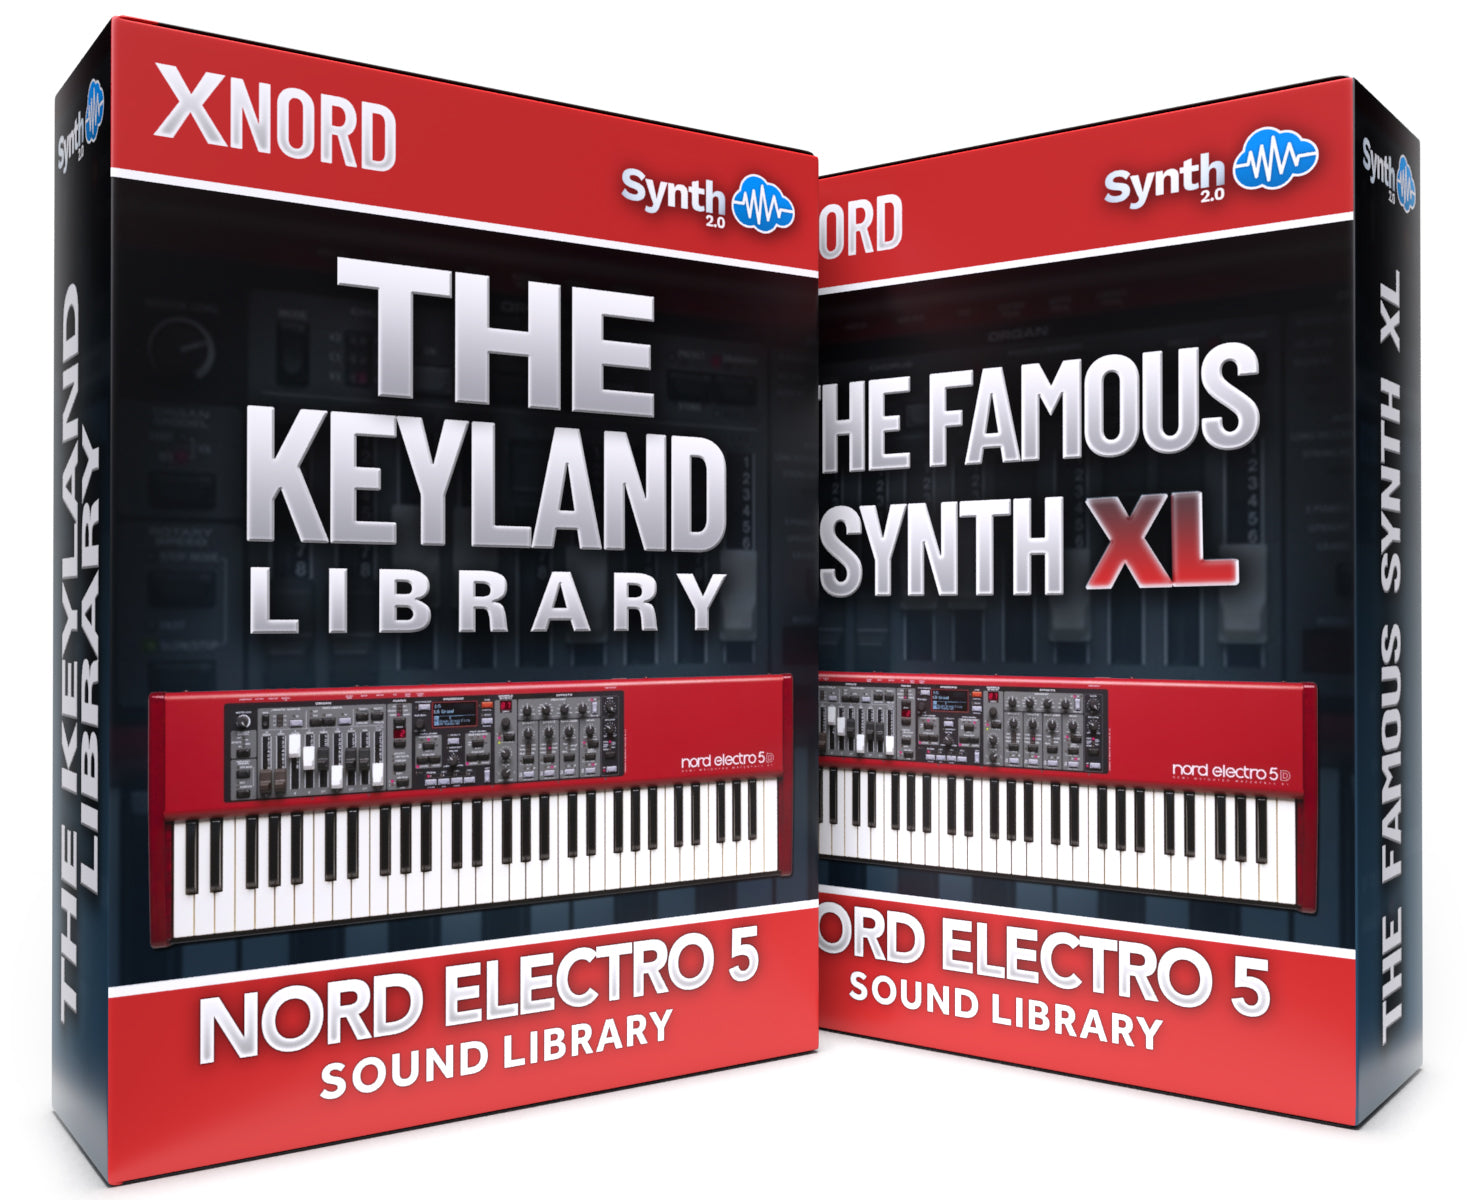 SLL005 - ( Bundle ) - The Keyland Library + The Famous Synth XL - Nord Electro 5 Series